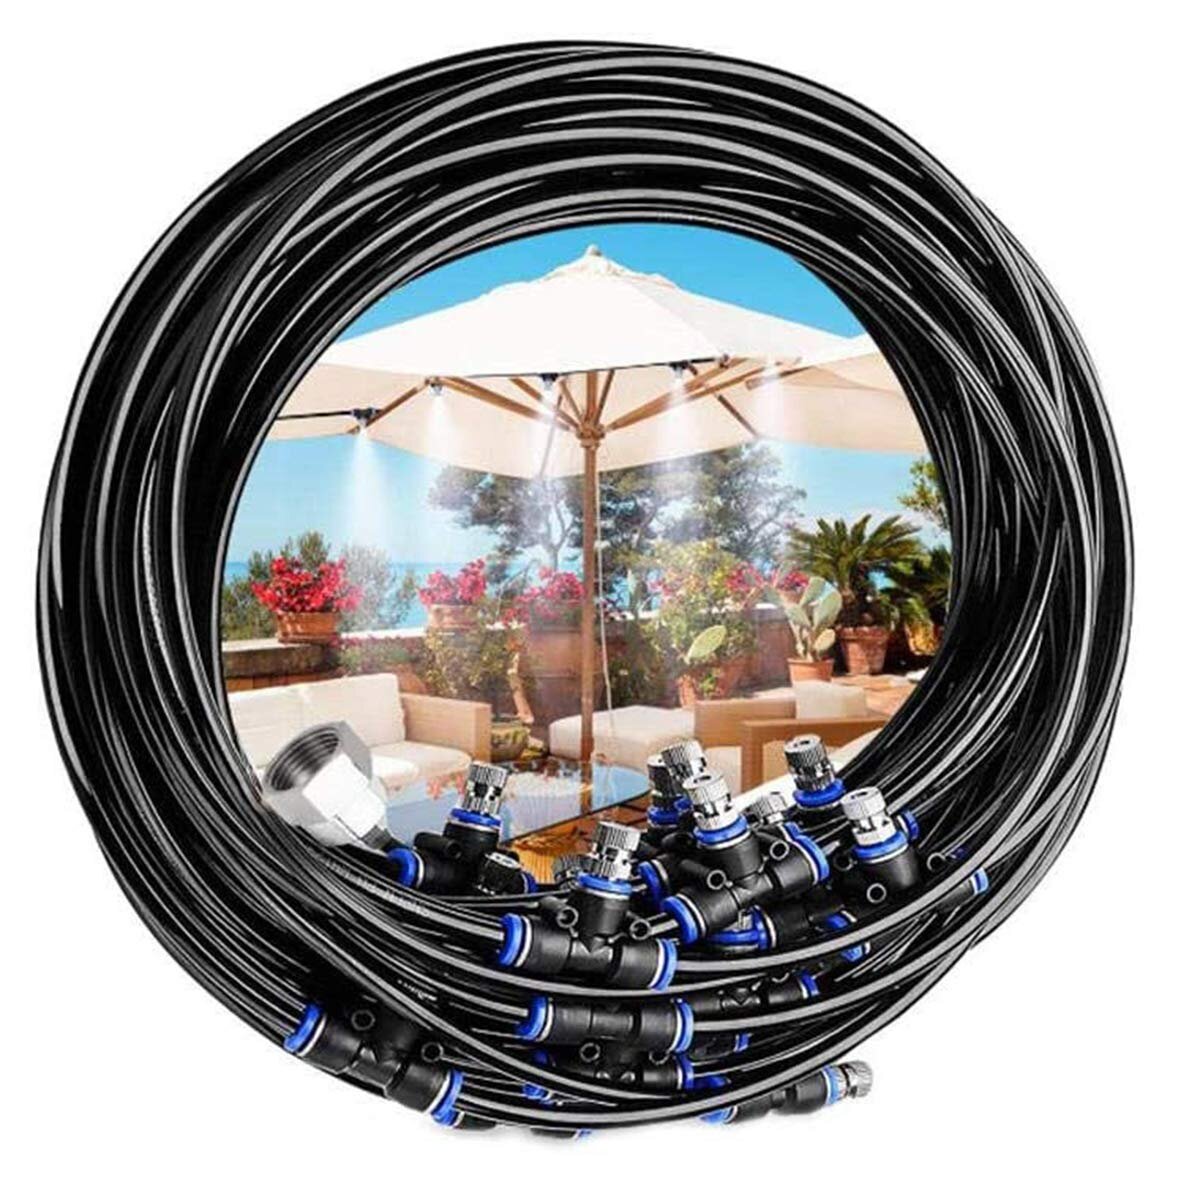 

6m Garden Watering Irrigation Spraying Kit Outdoor Cooling Dust Collect Air Humidification